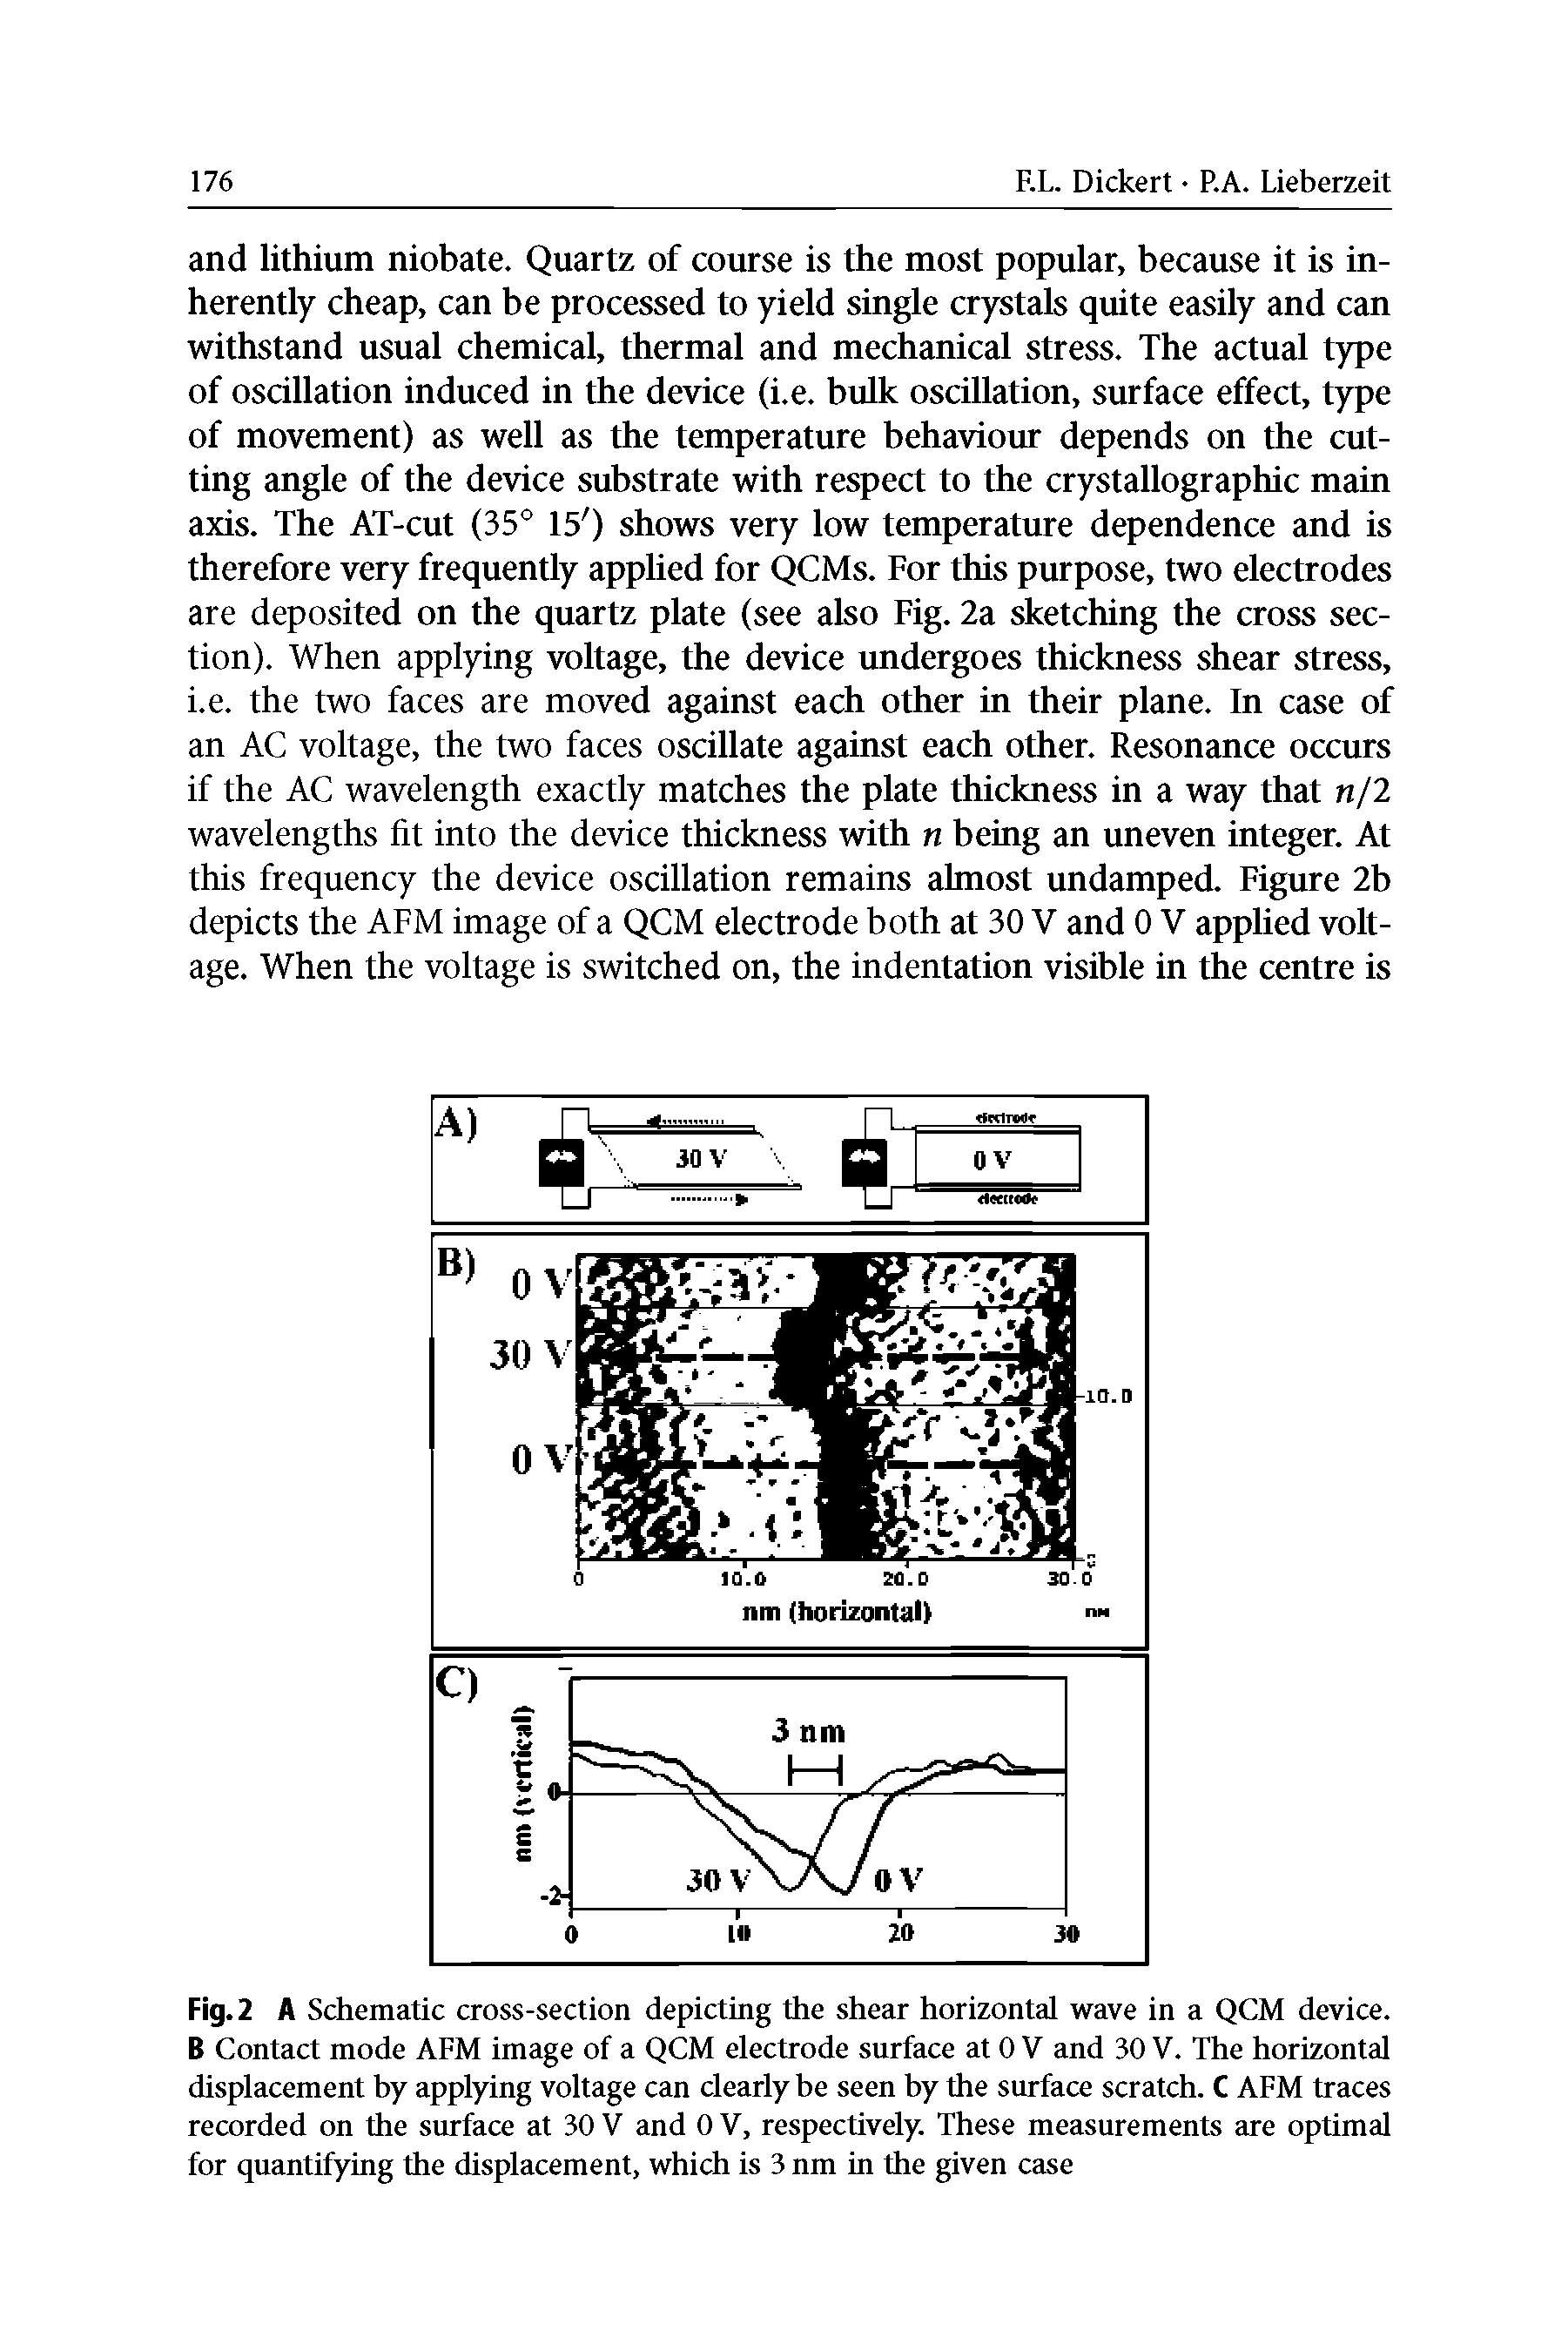 Fig. 2 A Schematic cross-section depicting the shear horizontal wave in a QCM device. B Contact mode AFM image of a QCM electrode surface at 0 V and 30 V. The horizontal displacement hy applying voltage can clearly he seen hy the surface scratch. C AFM traces recorded on the siuface at 30 V and 0 V, respectively. These measurements are optimal for quantifying the displacement, which is 3 nm in the given case...